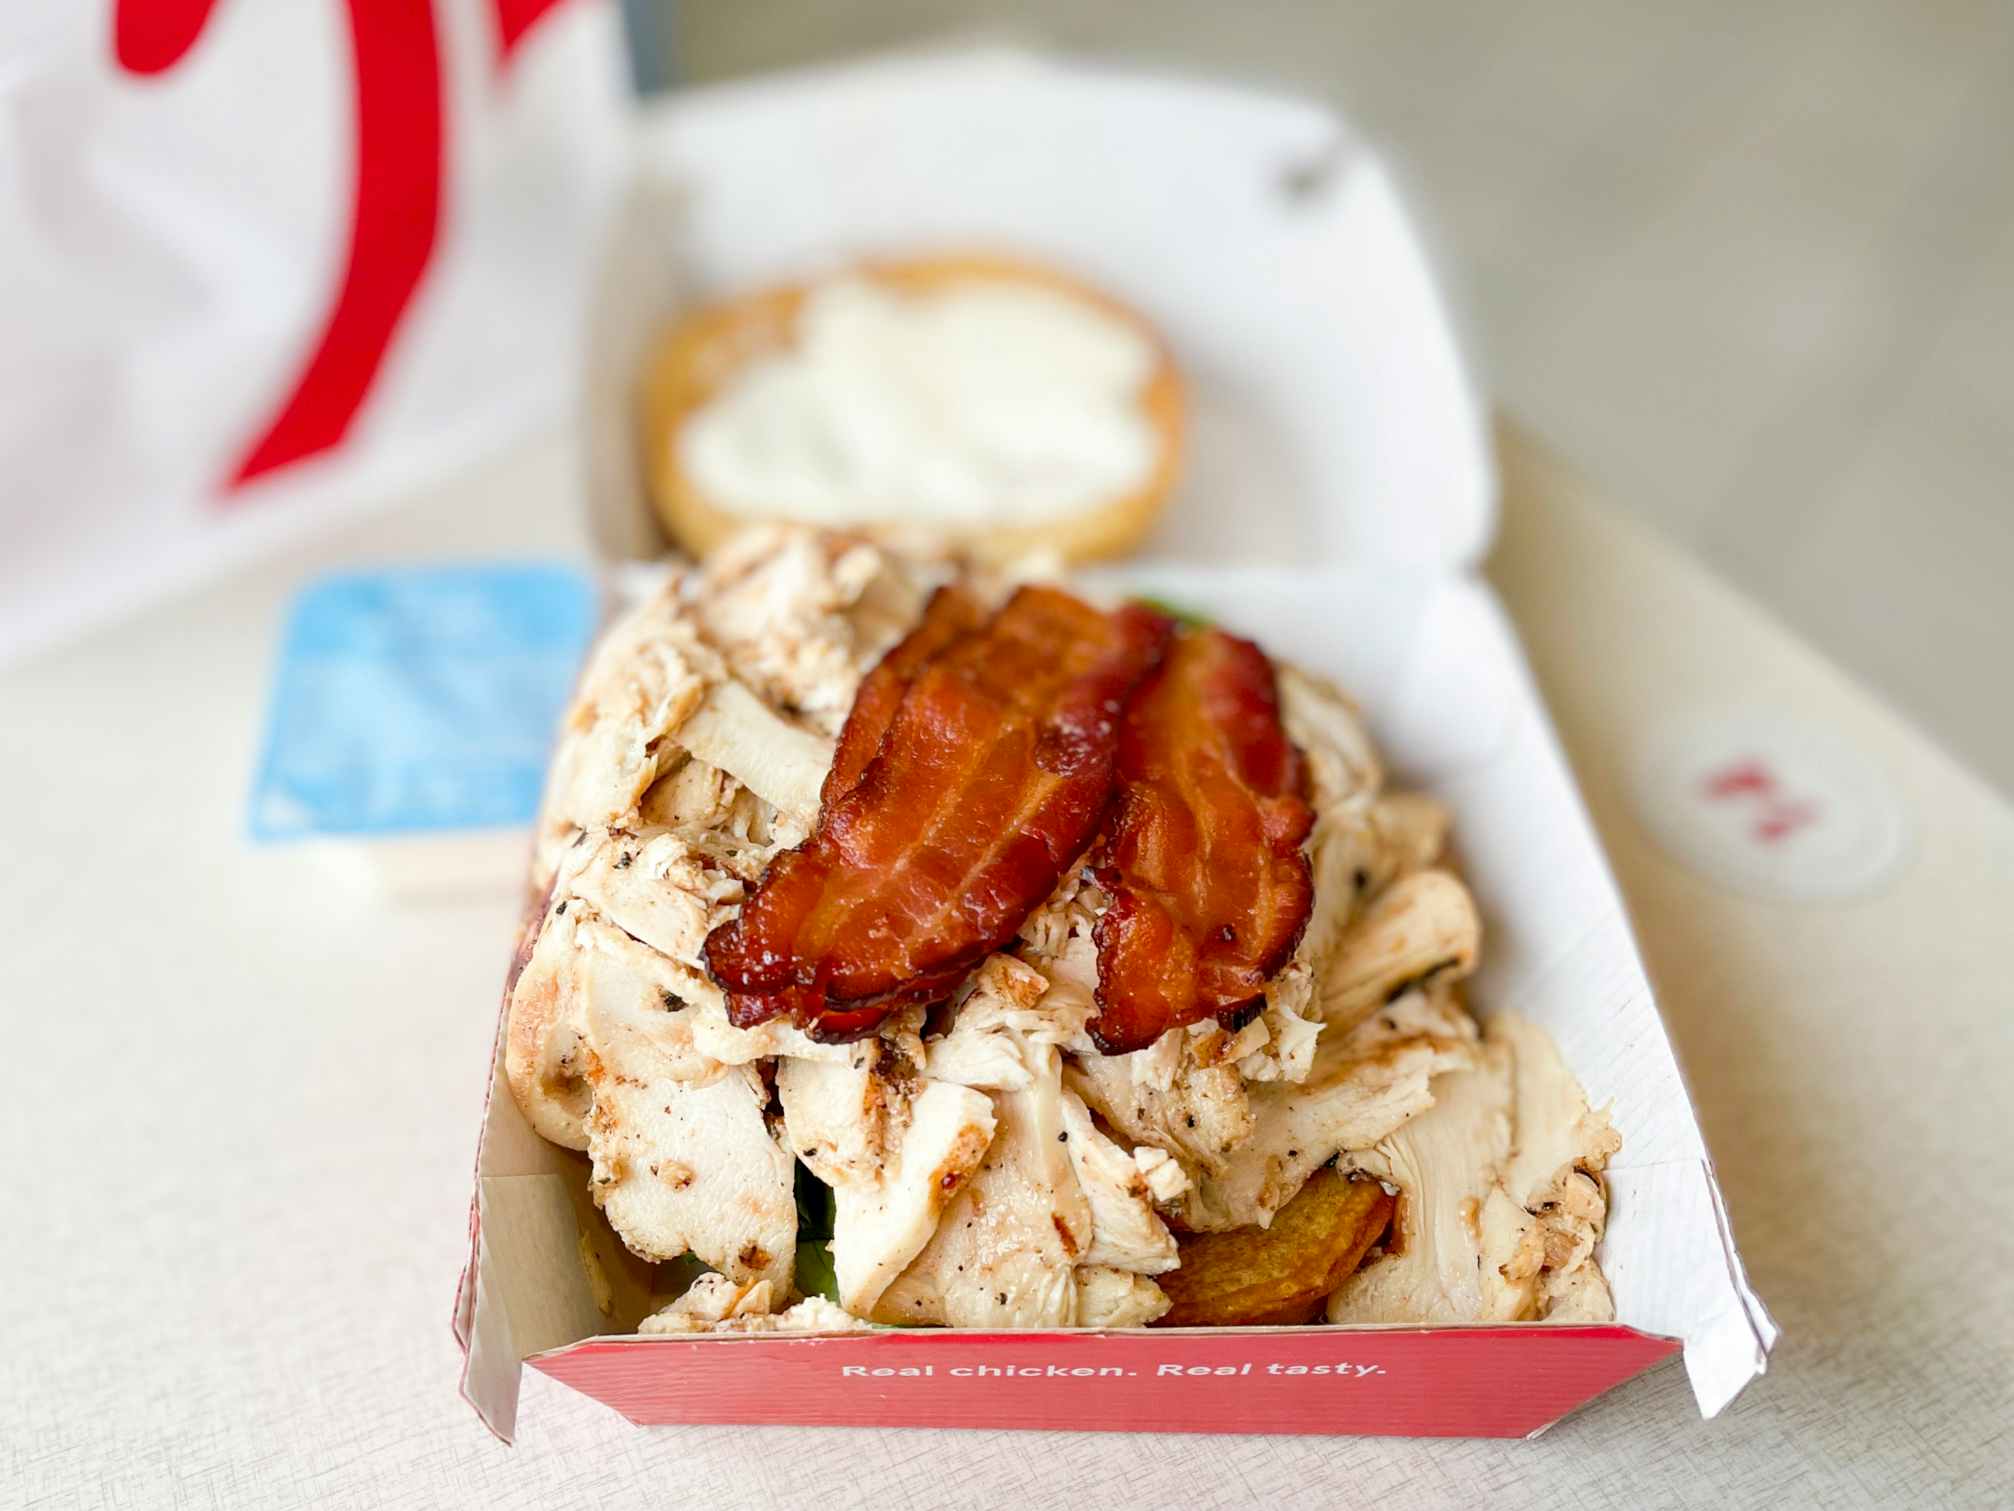 A chicken and bacon sandwich in cardboard takeout food box from chick-fil-a